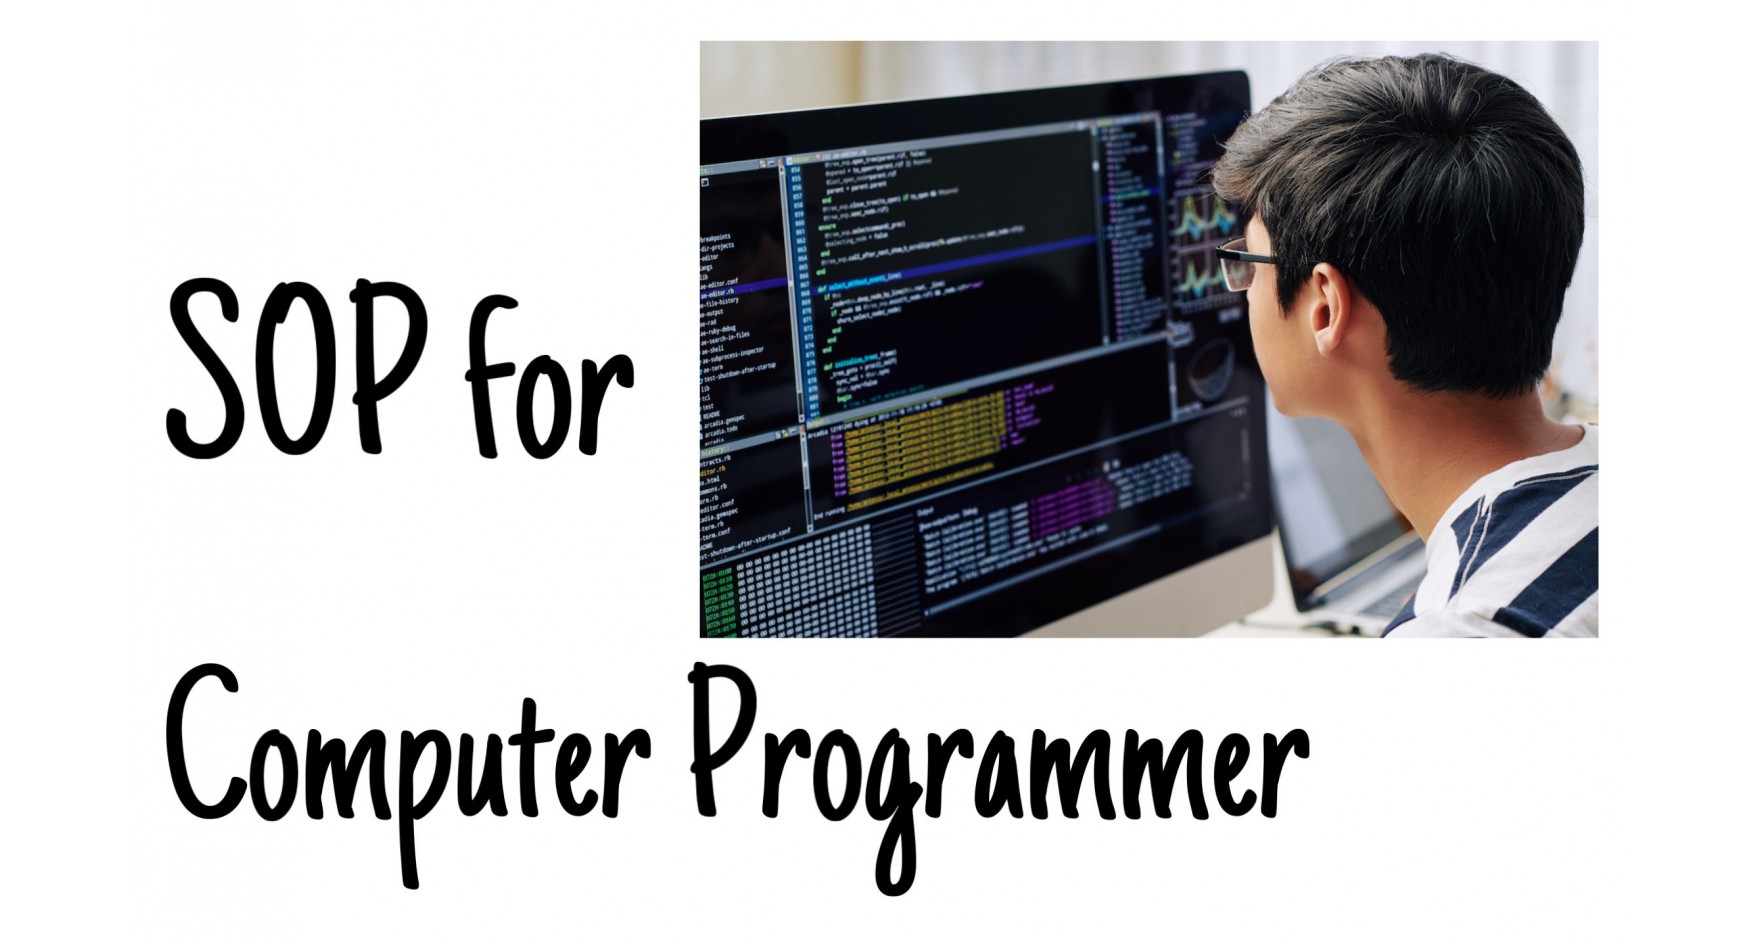 How to write SOP for Computer Programmer?